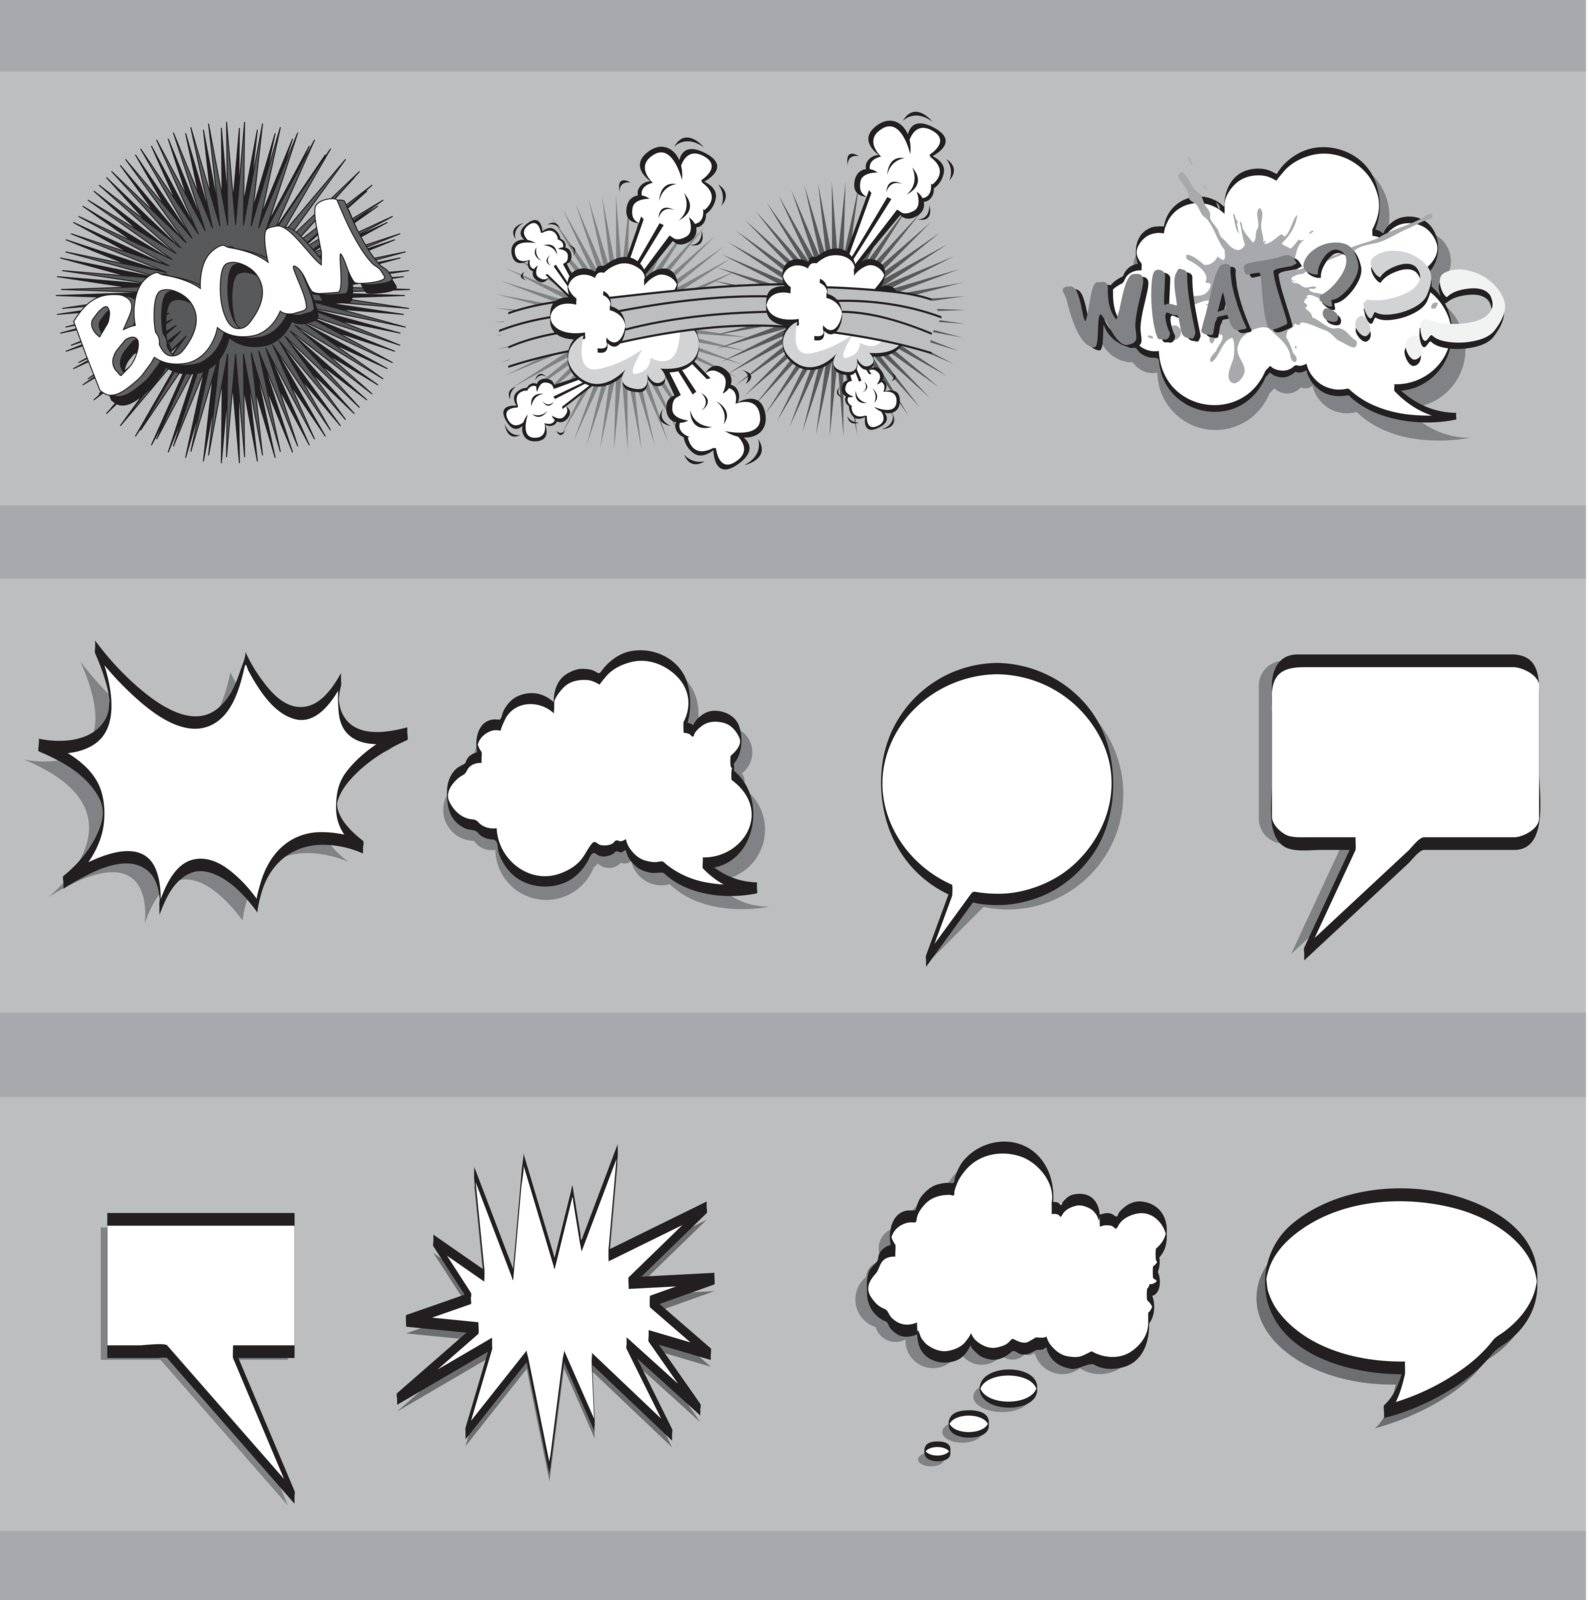 balloons text over gray background, comic. vector